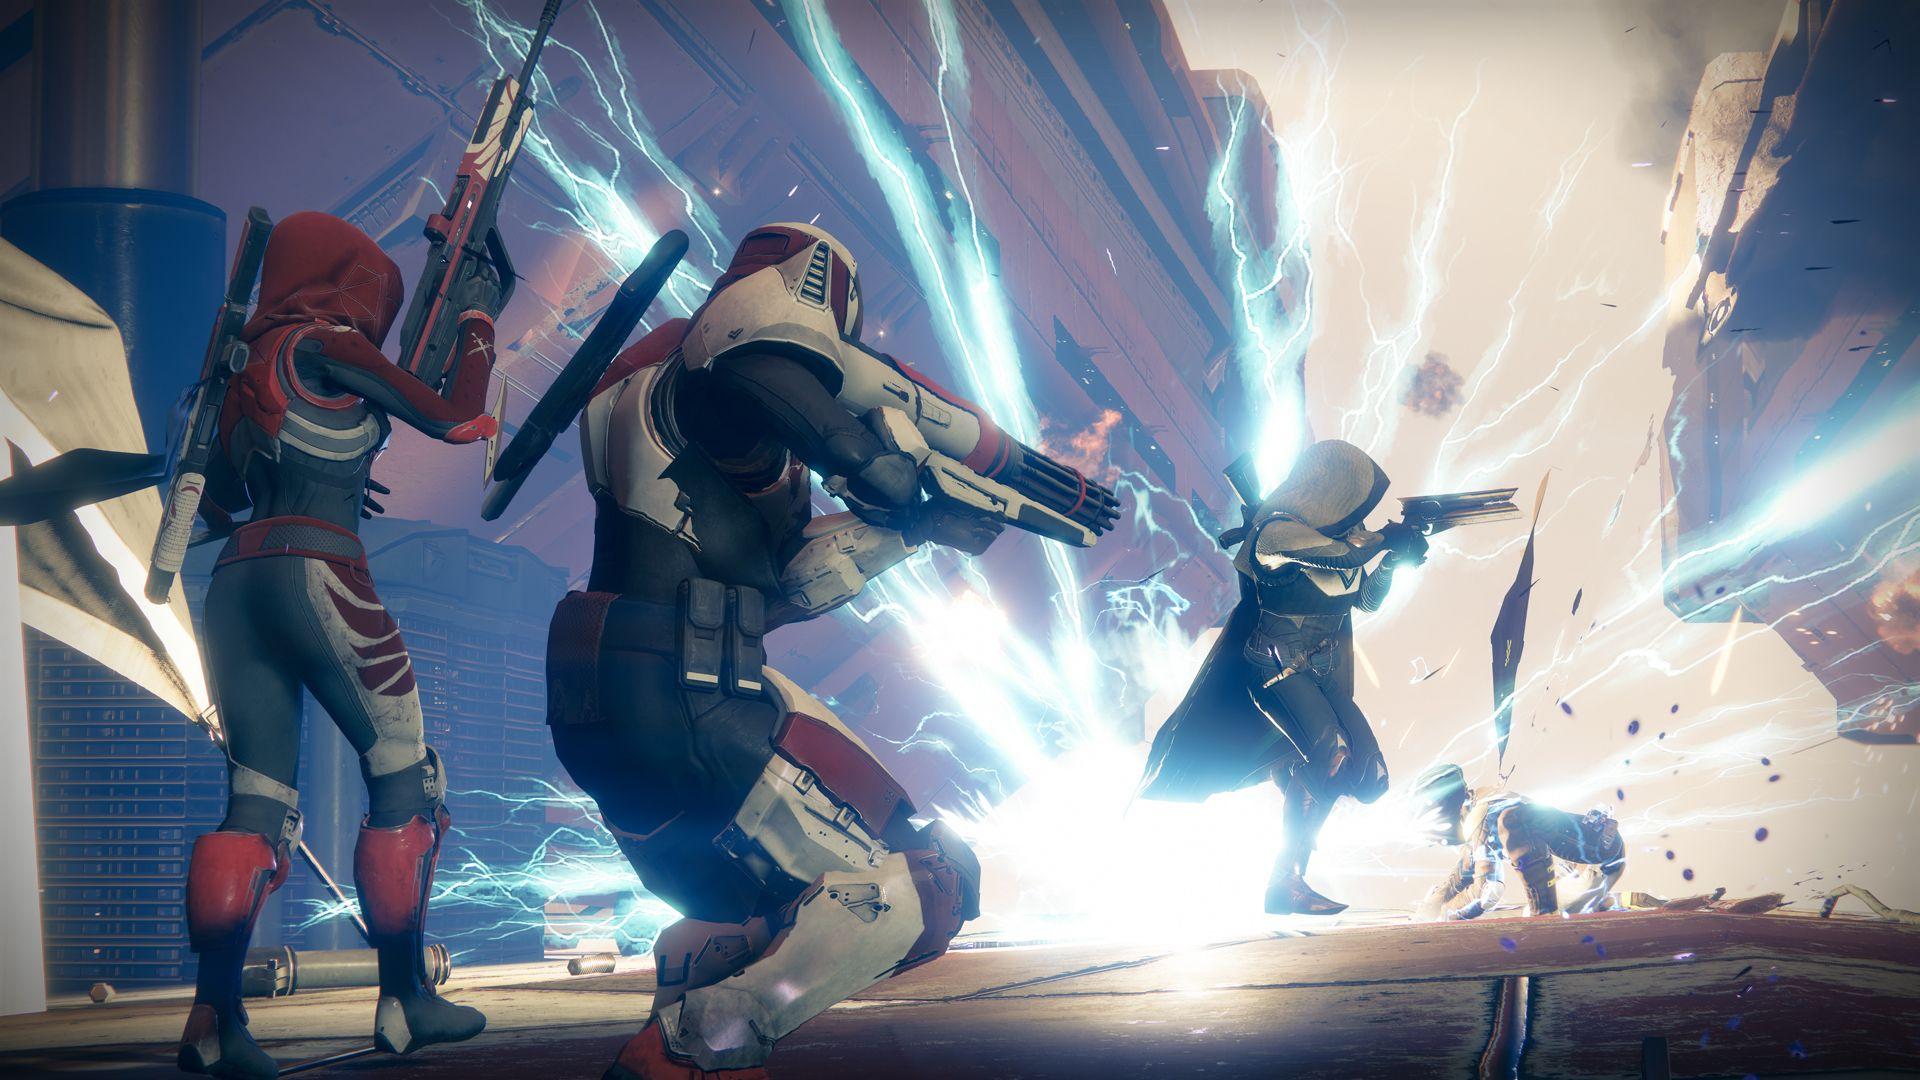 We've Played The Final Build of Destiny 2 on PC, Here Are Our